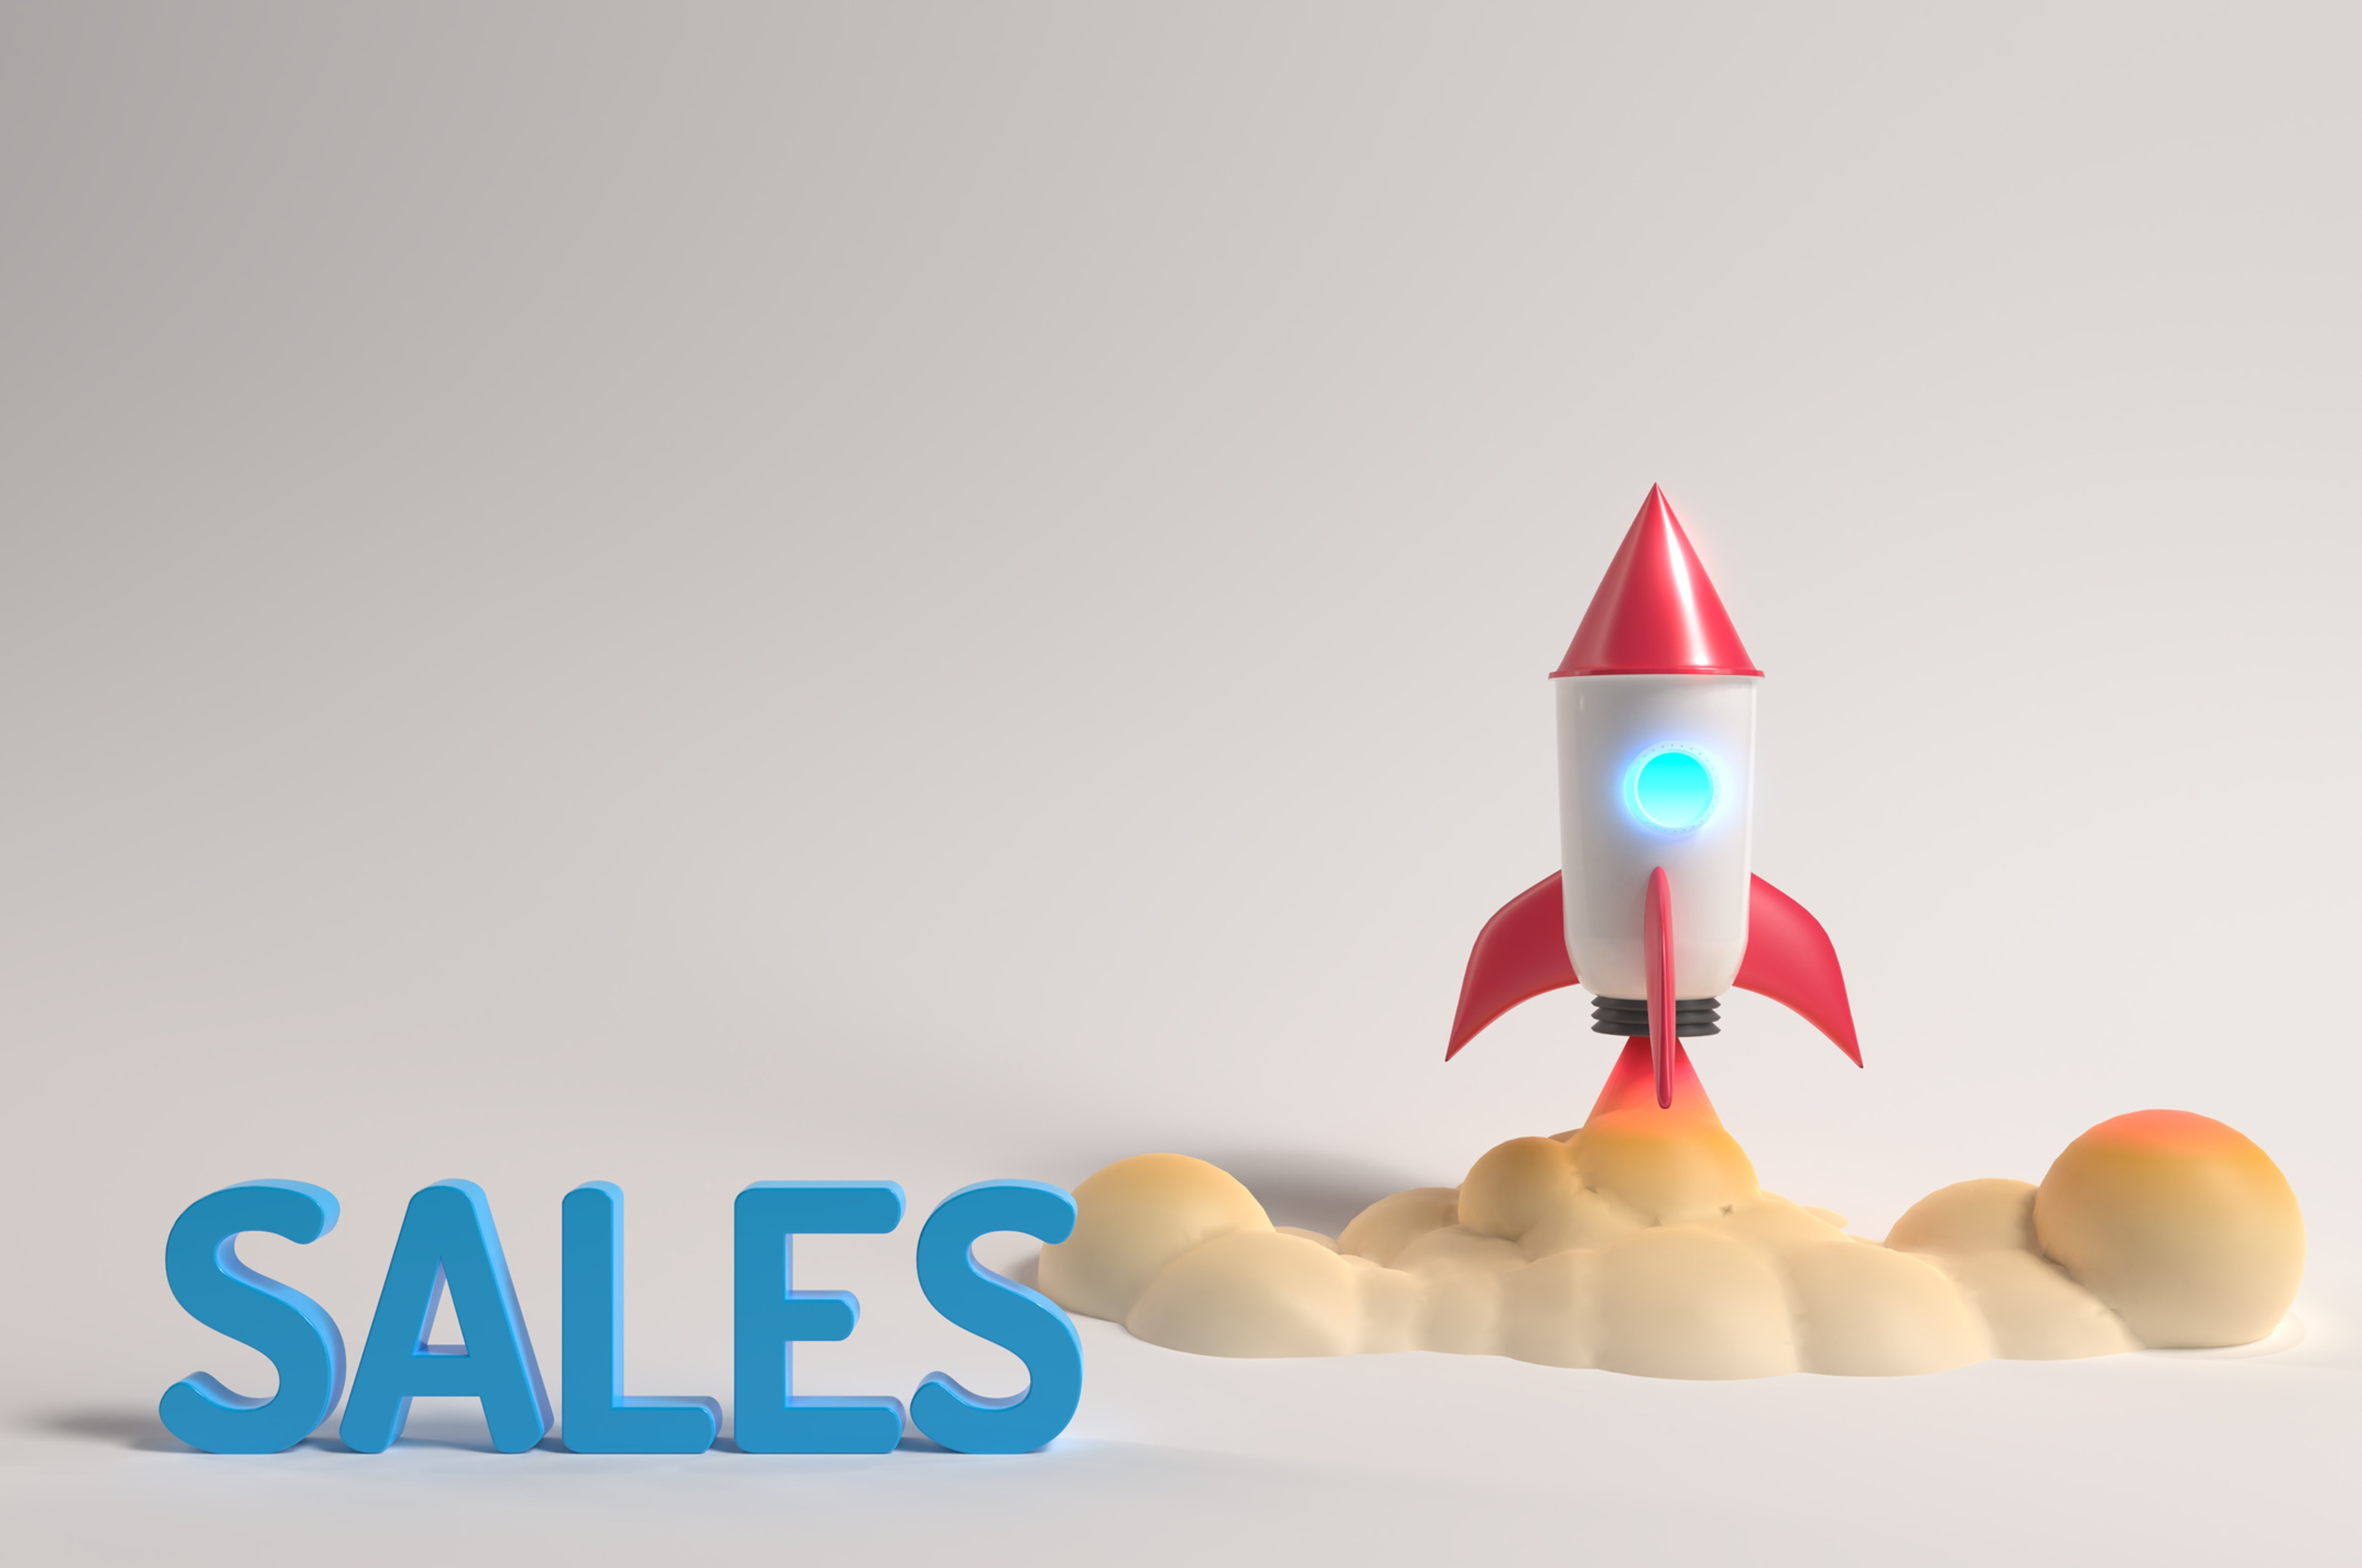 Image of the word Sales and a toy rocket in the back